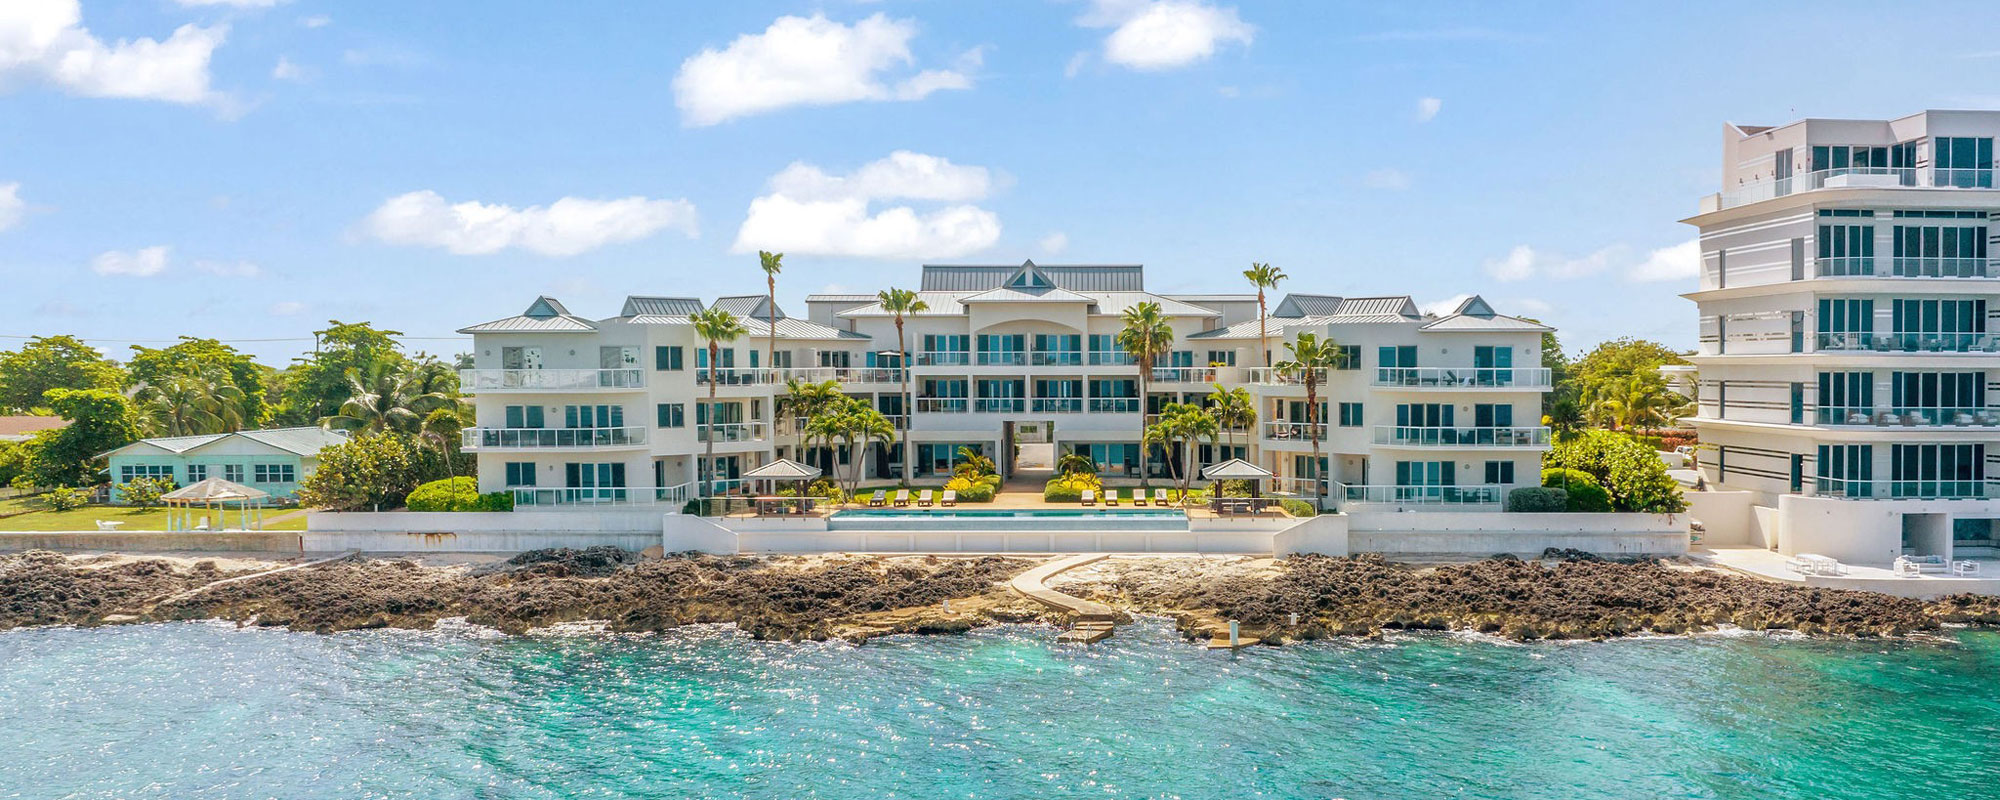 Golden Visa Real Estate Investment in the Cayman Islands